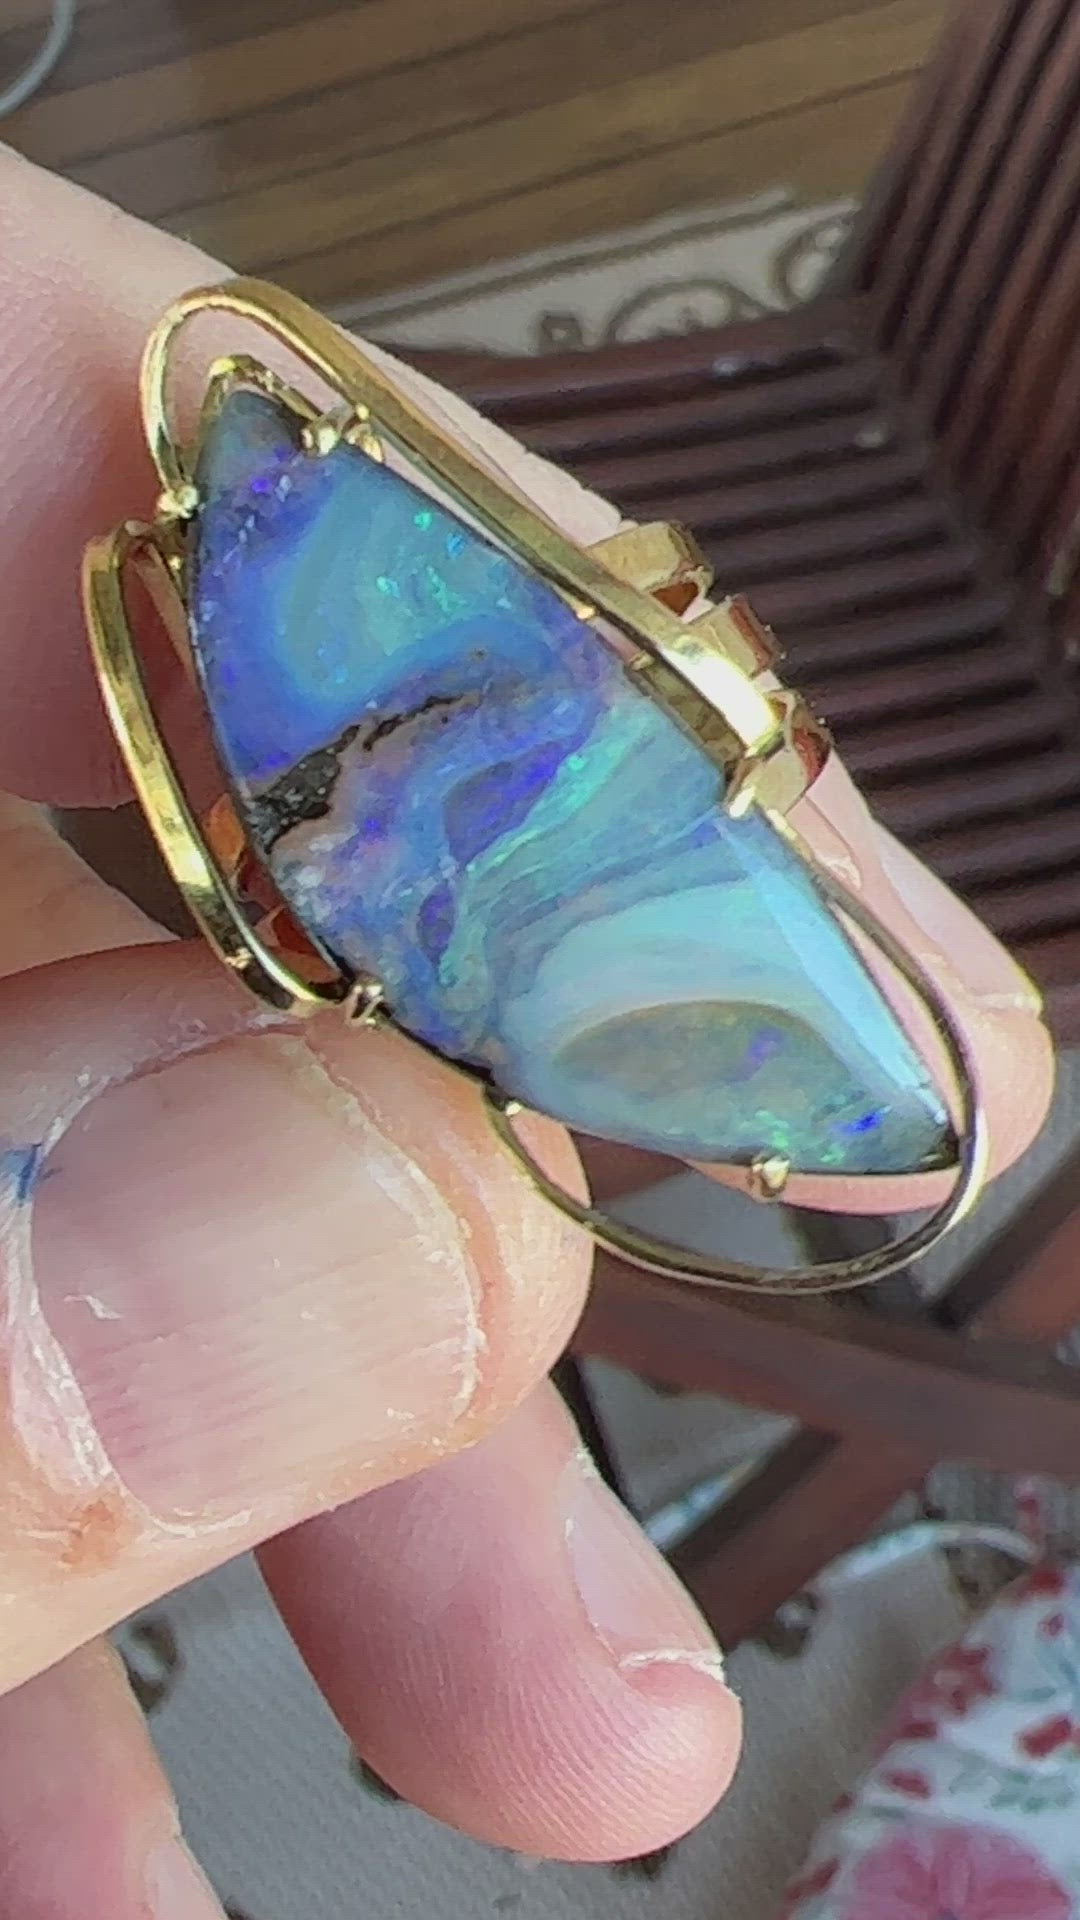 A beautiful statement ring custom made with rare Queensland Boulder opal. The stone has a perfect polish and is set in a wonderful 14ct gold triple ring.